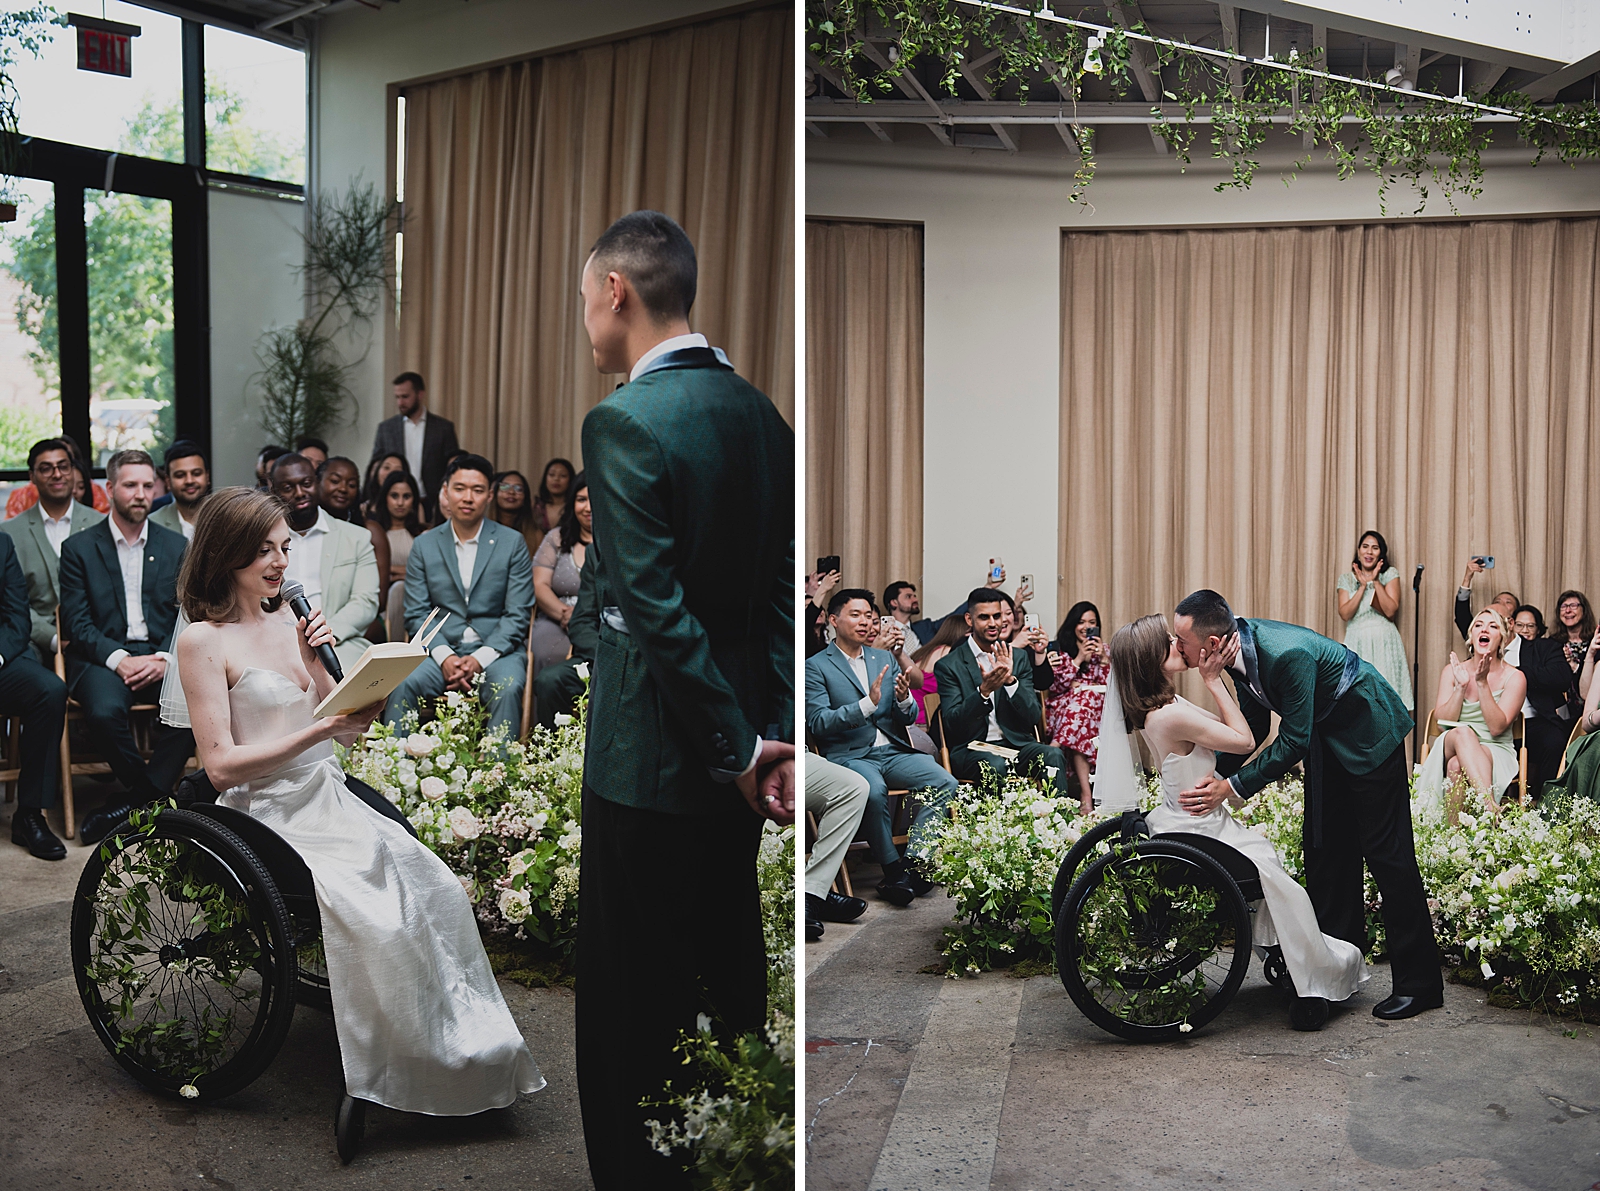 Left photo: Shot of the bride smiling as she reads her vows. 
Right photo: Shot of the bride and groom sharing a kiss at the altar.